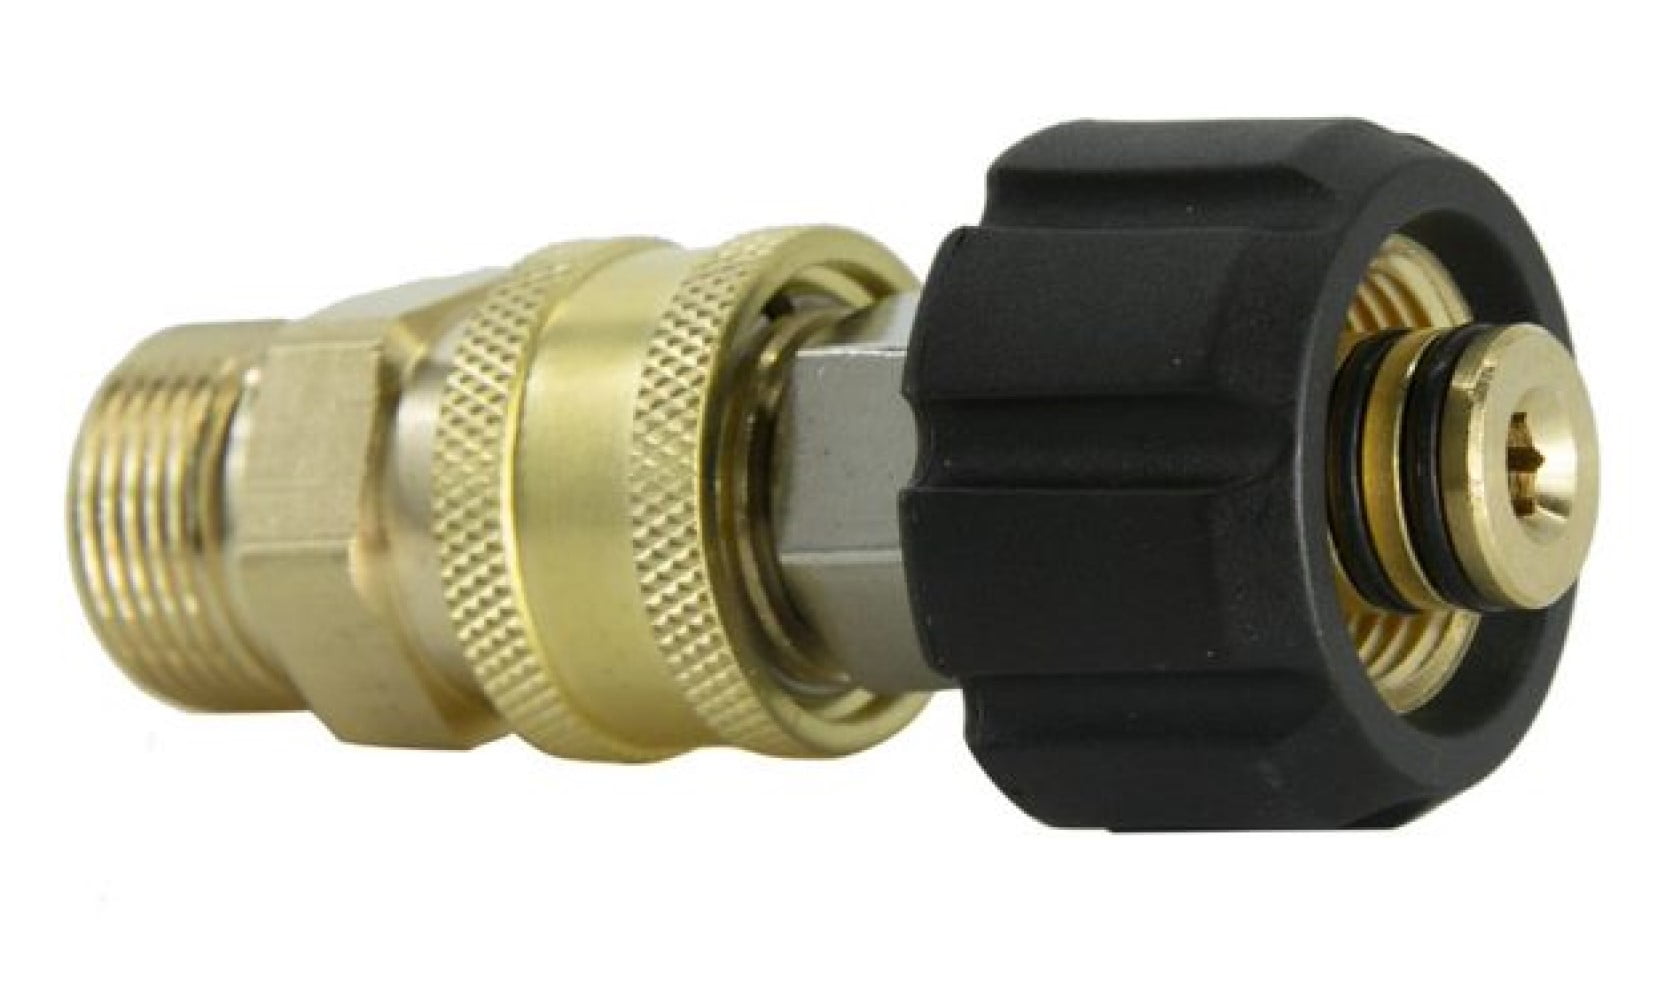 New Pressure Washer 1" Brass Quick Release Coupling Inlet For Karcher HDS Range 